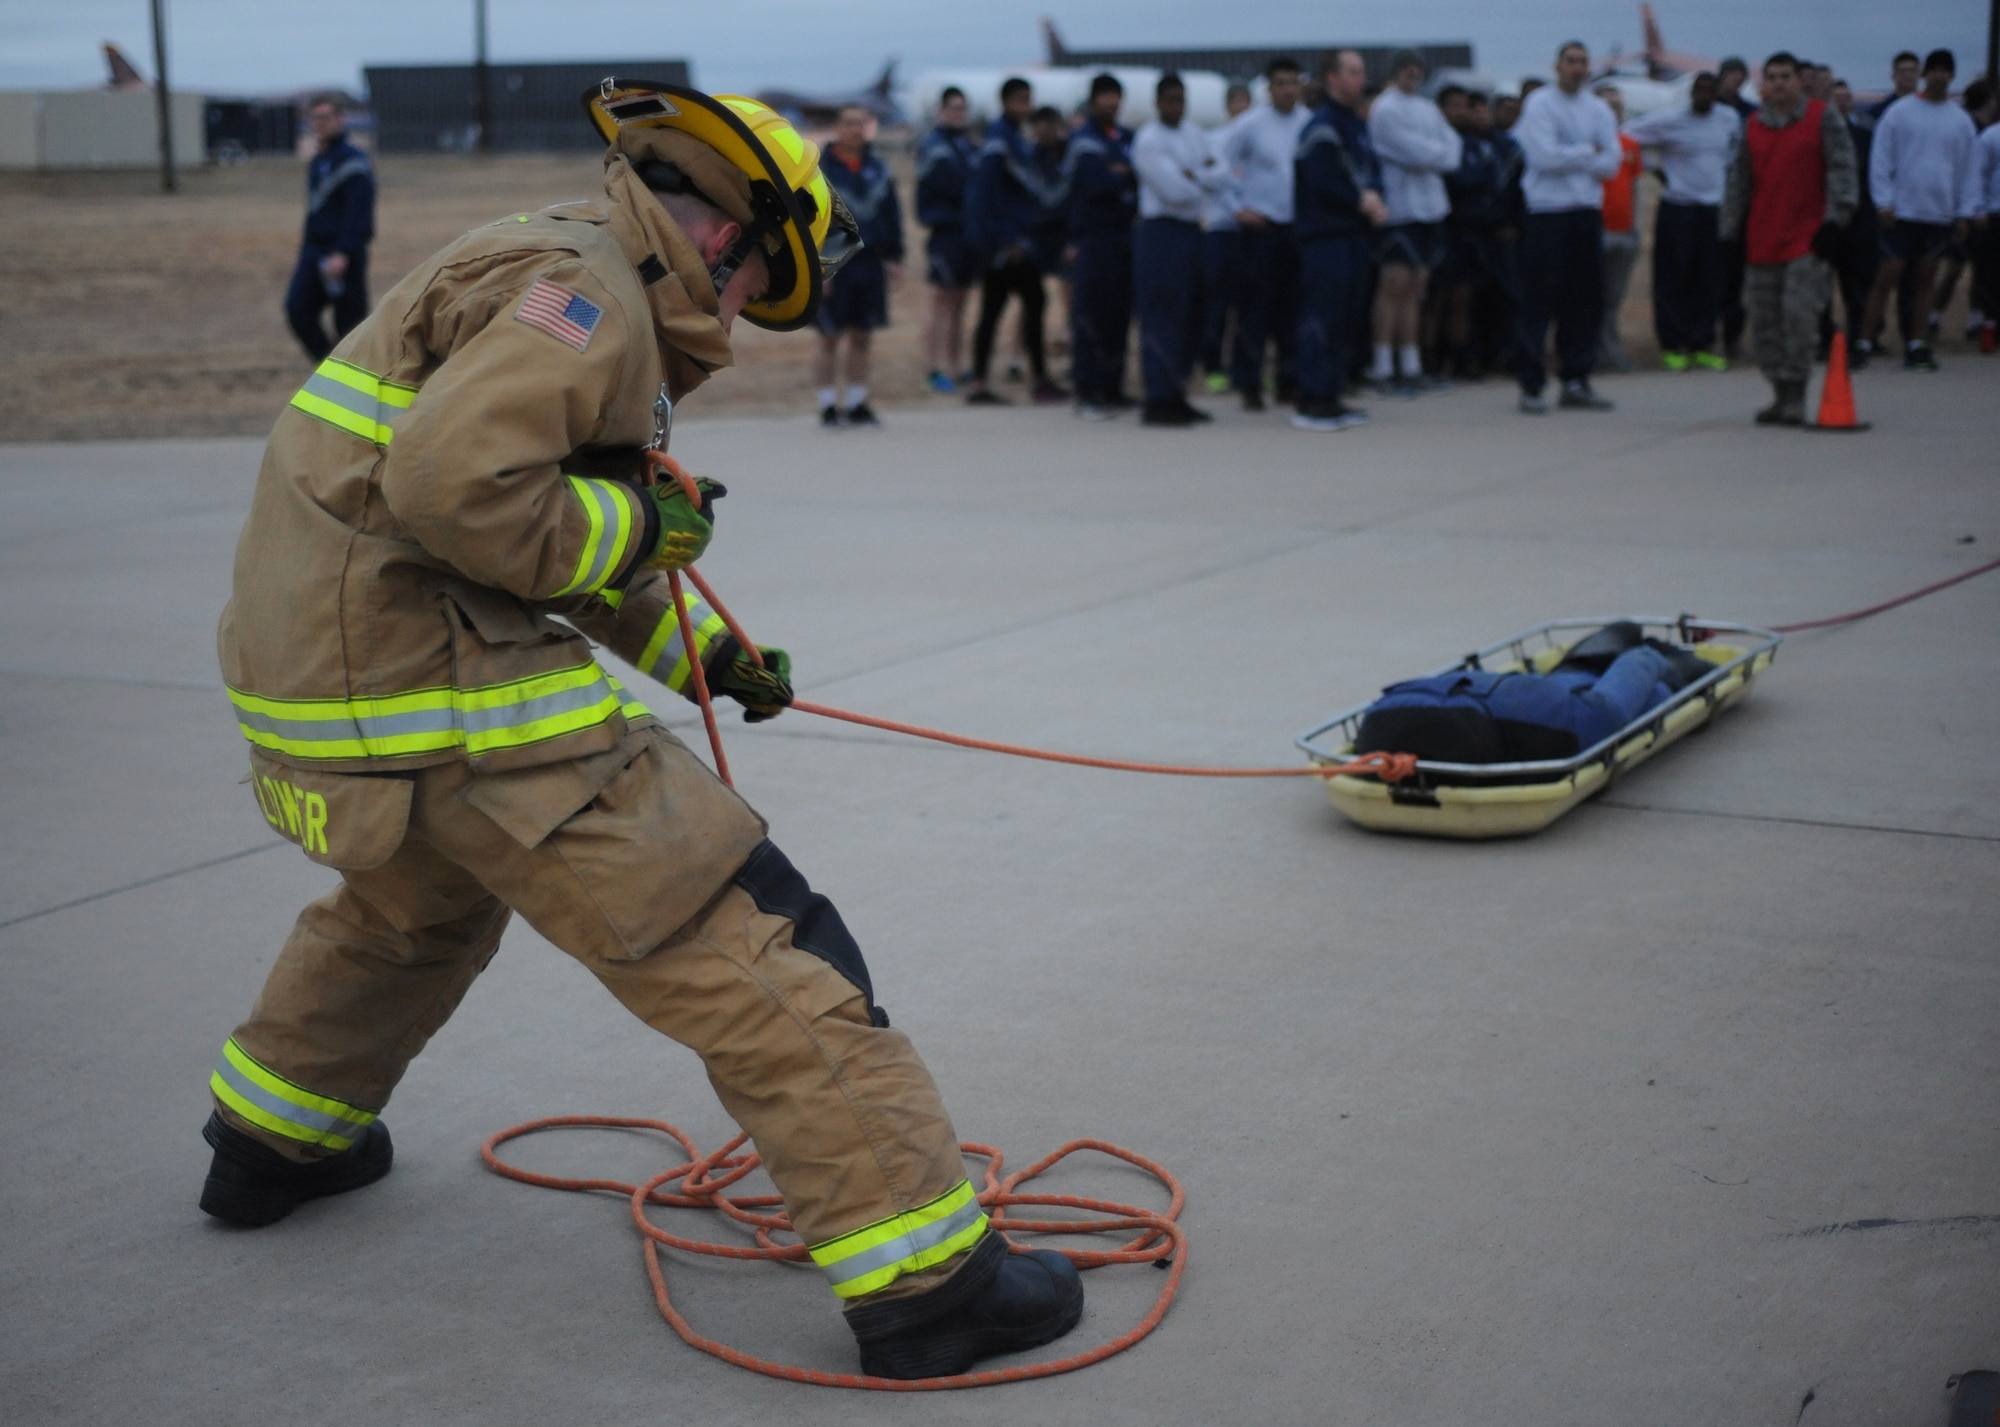 Senior Airman Gavin Flower, a 7th Civil Engineer Squadron firefighter, participates in a basket drag during the remembrance muster in honor of Dyess’ fallen firefighter, Staff Sgt. Ray Rangel, Feb. 13, 2017, at Dyess Air Force Base, Texas. Rangel was a firefighter assigned to the 7th CES at Dyess, who died while attempting to rescue two soldiers trapped in a Humvee that overturned in a canal outside of Balad Air Base, Iraq, Feb. 13, 2005. (U.S. Air Force photo by Airman 1st Class Emily Copeland)